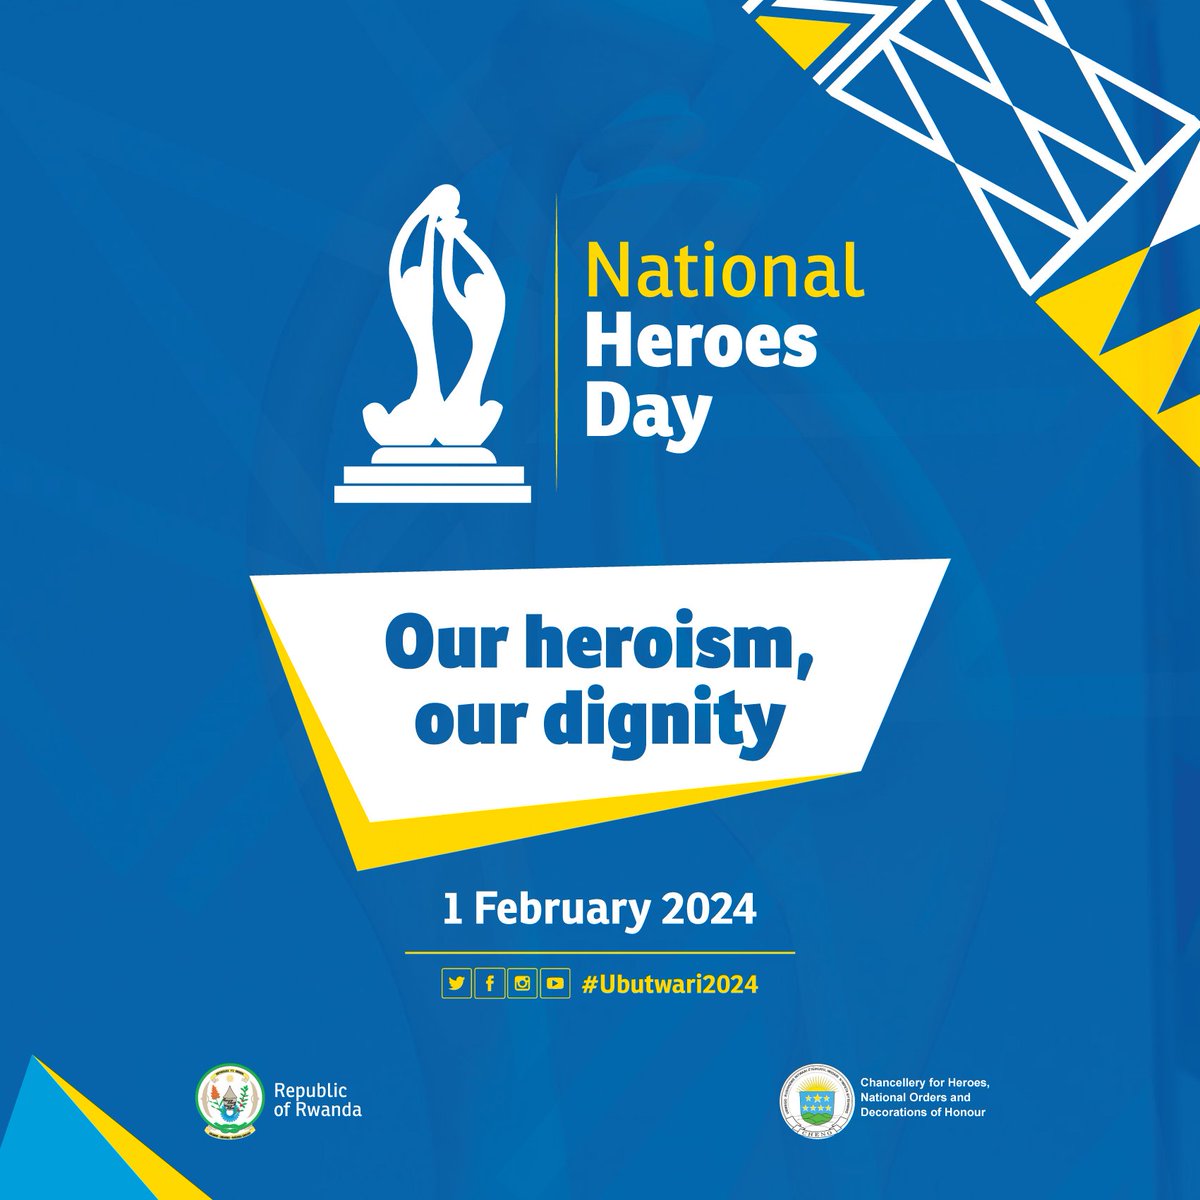 The Management and Staff of Higher Education Council would like to wish all Rwandans a Happy National Heroes Day! 'Our Heroism, Our Dignity' #Ubutwari2024